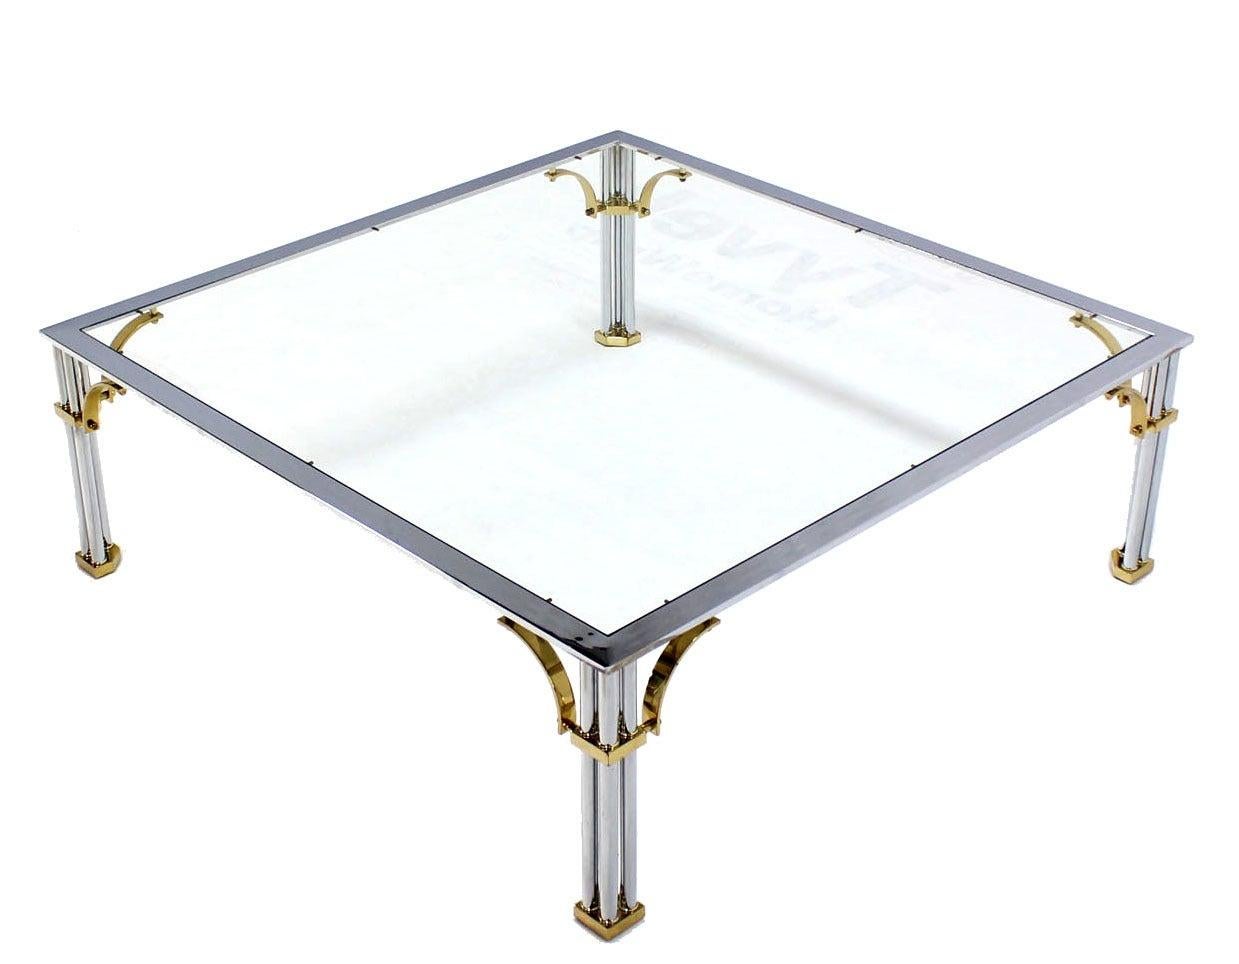 Large Square Italian Mid Century Modern Brass Chrome Glass Top Coffee Table MINT For Sale 3